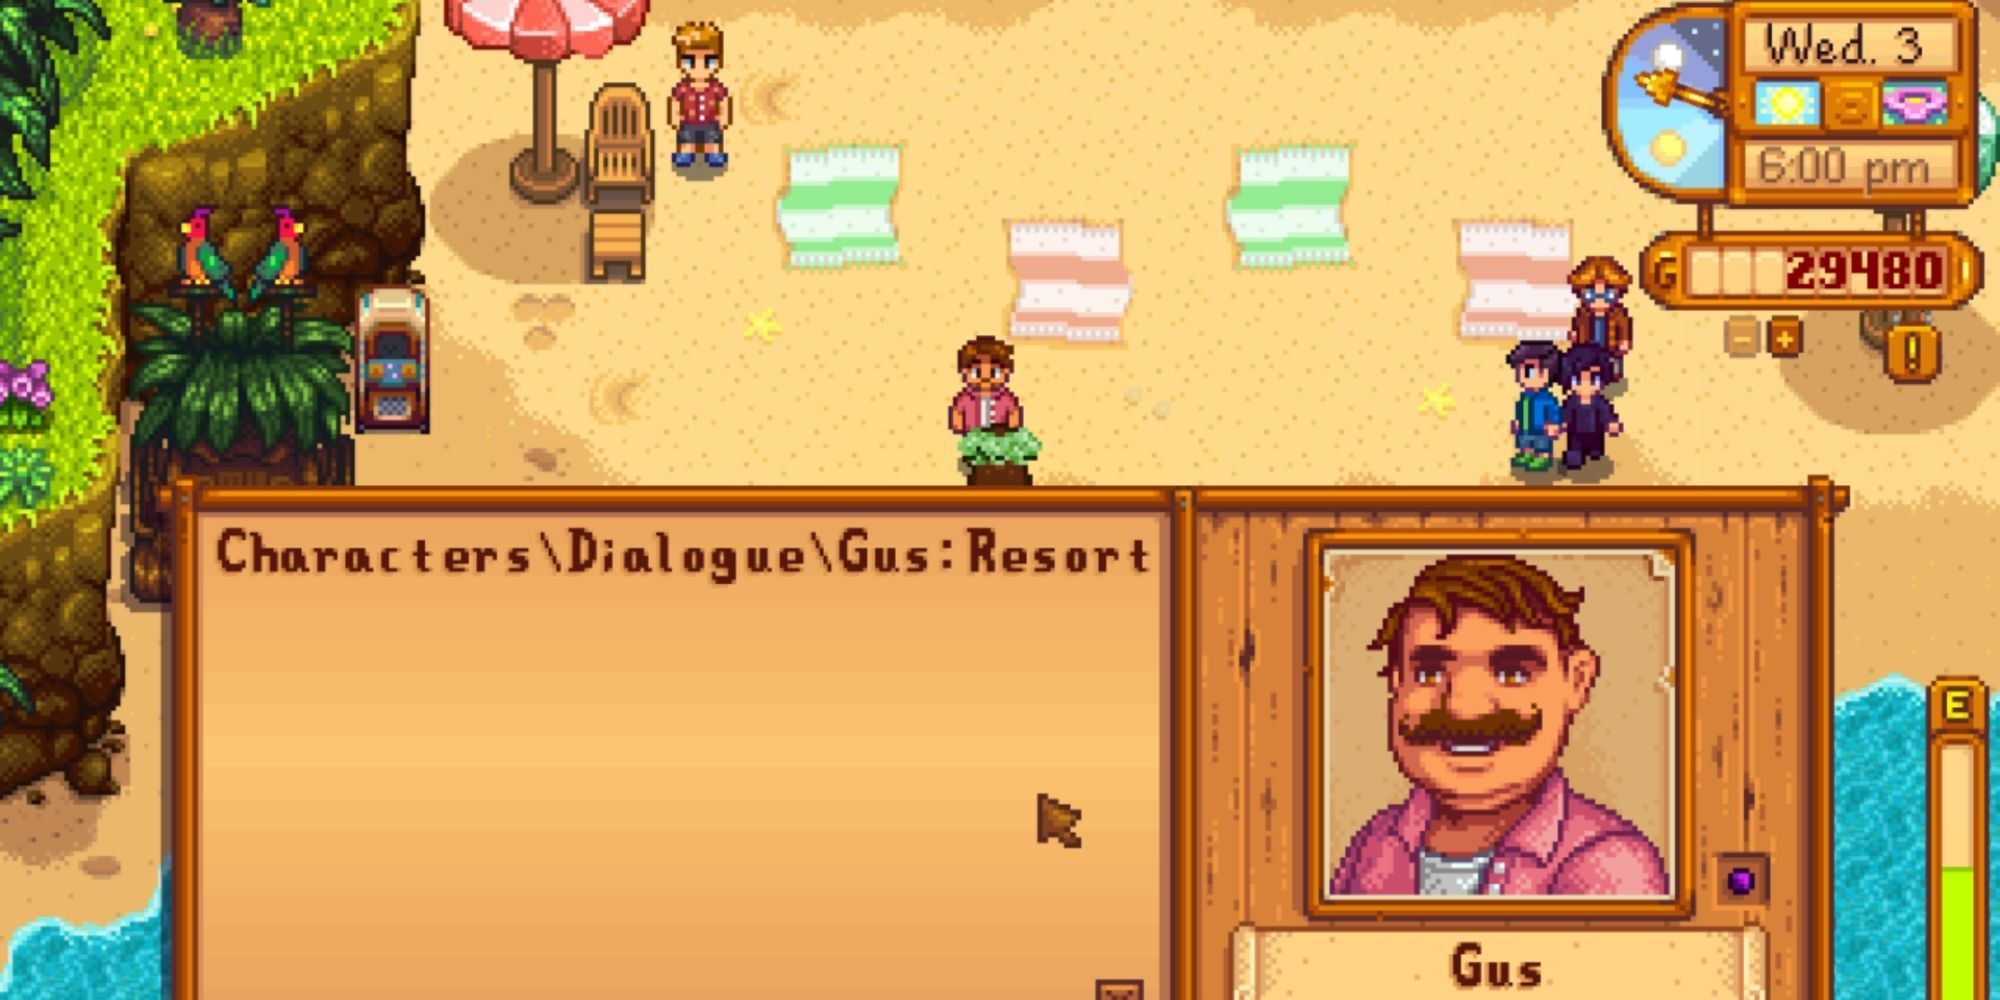 Stardew Valley Gus Funny Resort Dialogue